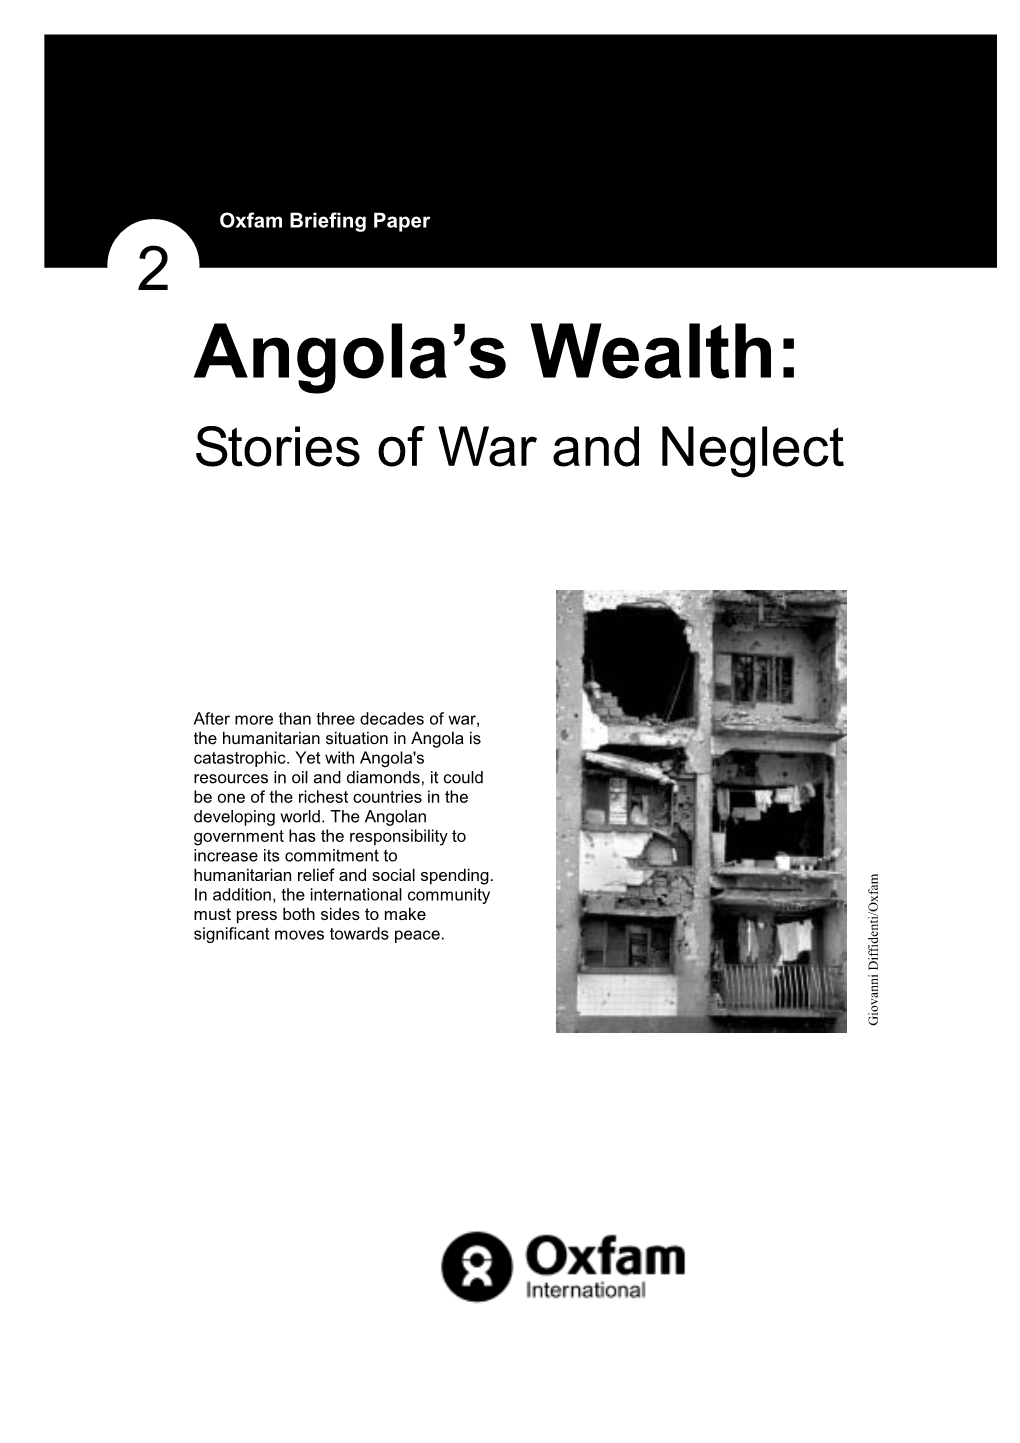 Angola's Wealth: Stories of War and Neglect